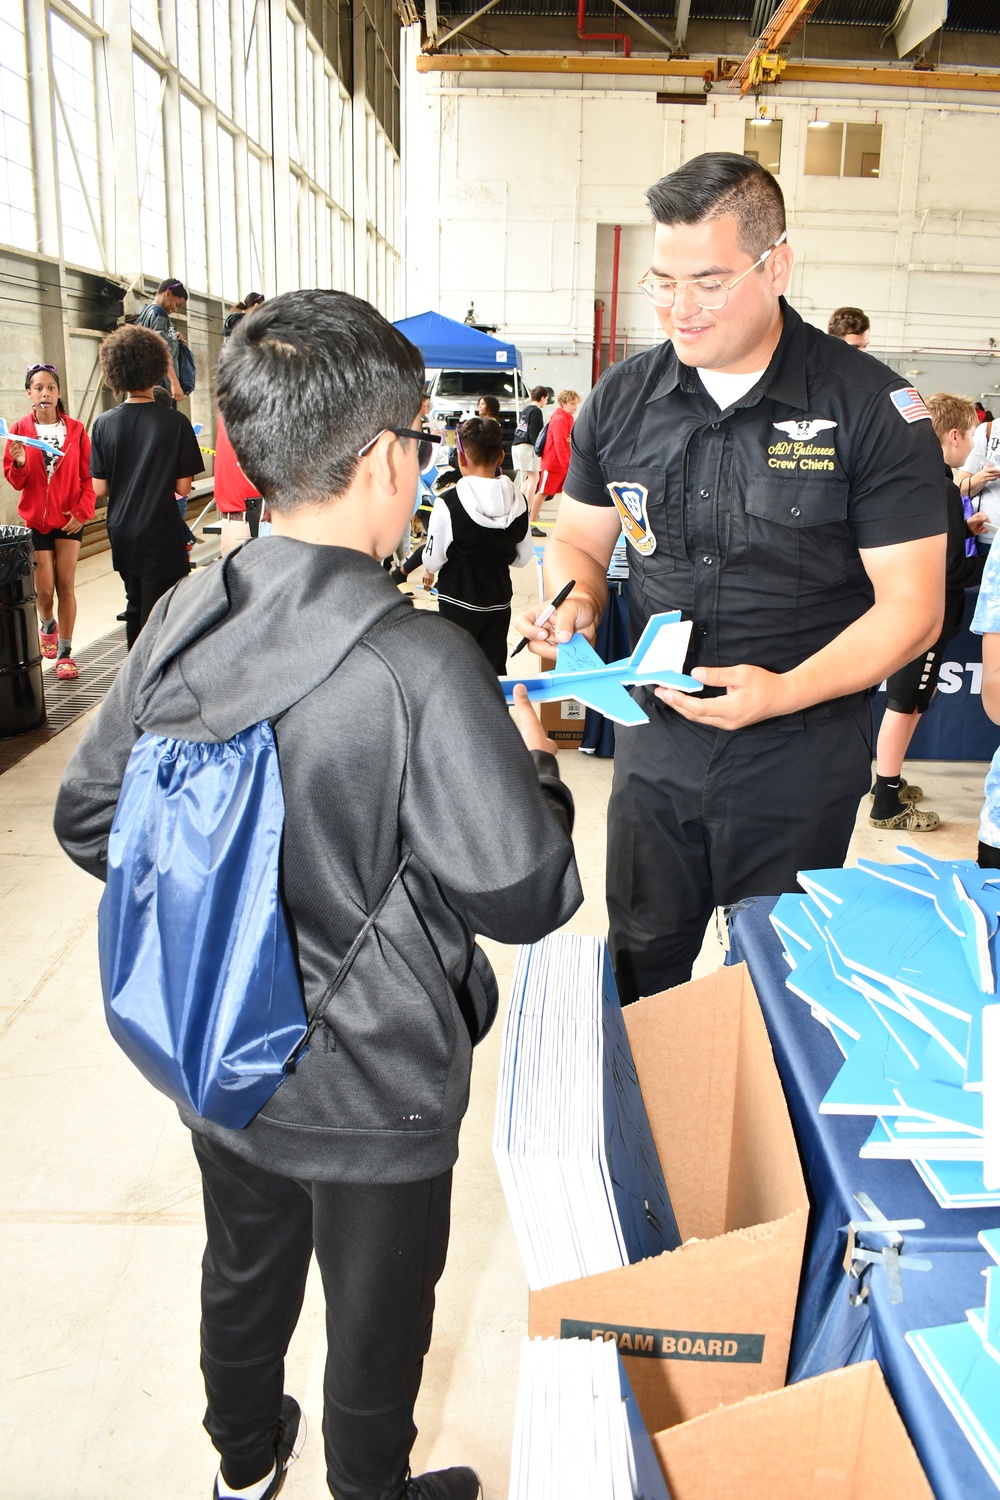 Imaginations soar at Air Show STEM Day